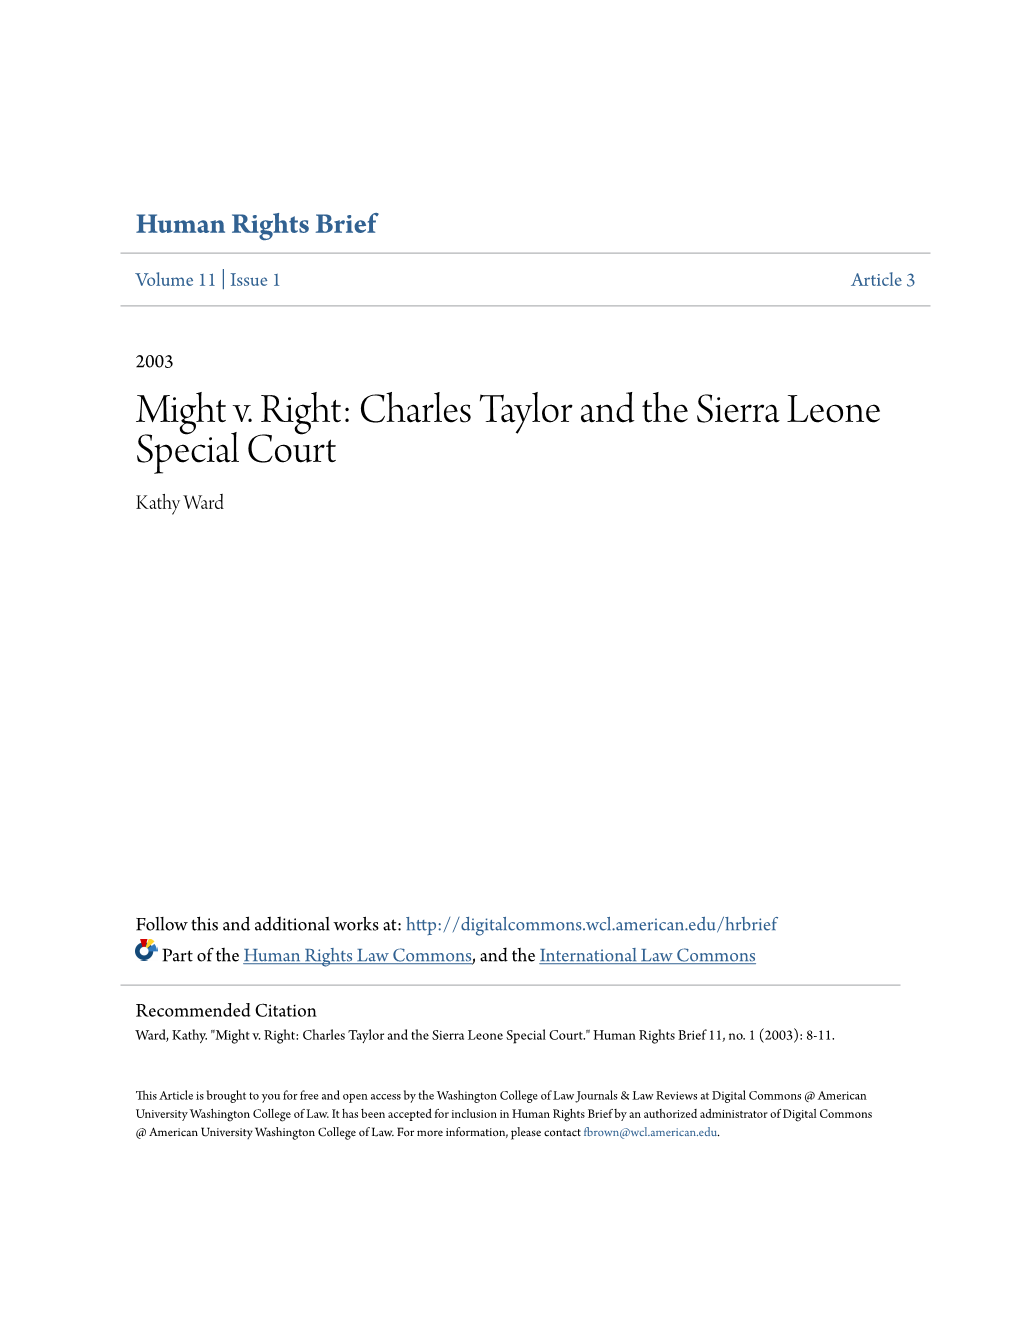 Charles Taylor and the Sierra Leone Special Court Kathy Ward